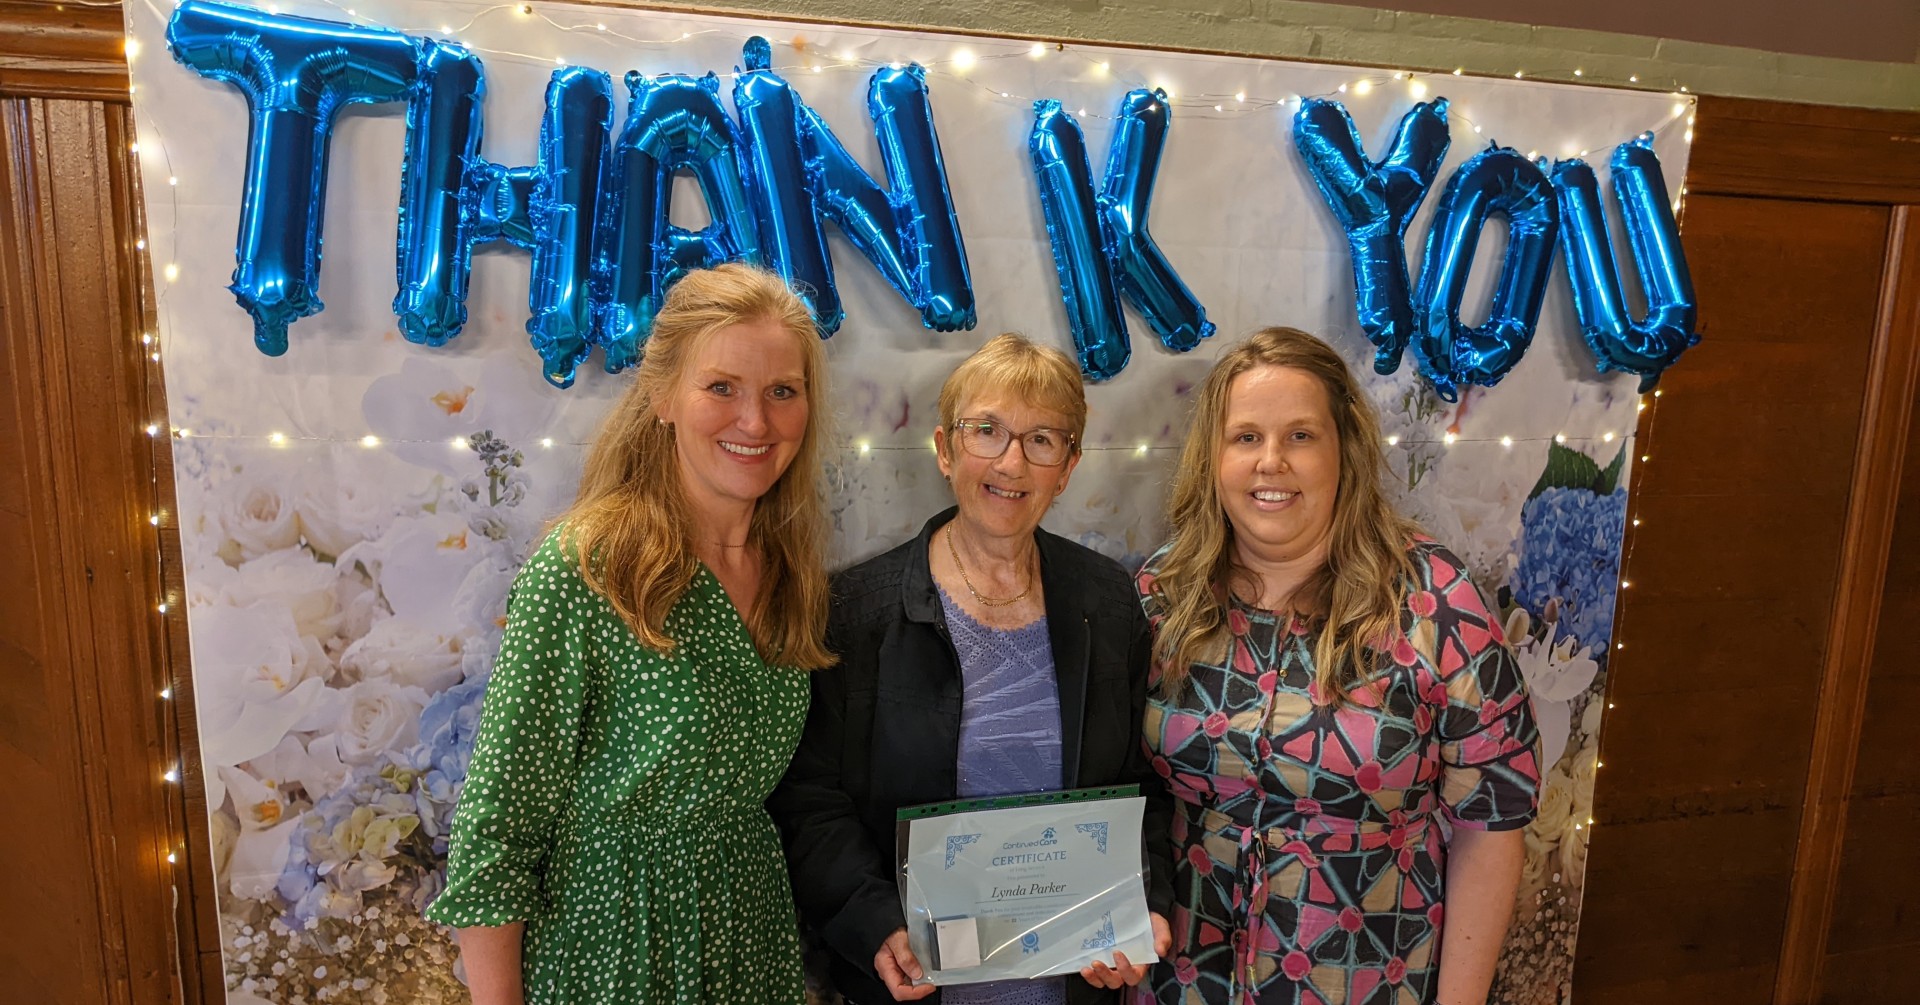 Continued Care awards